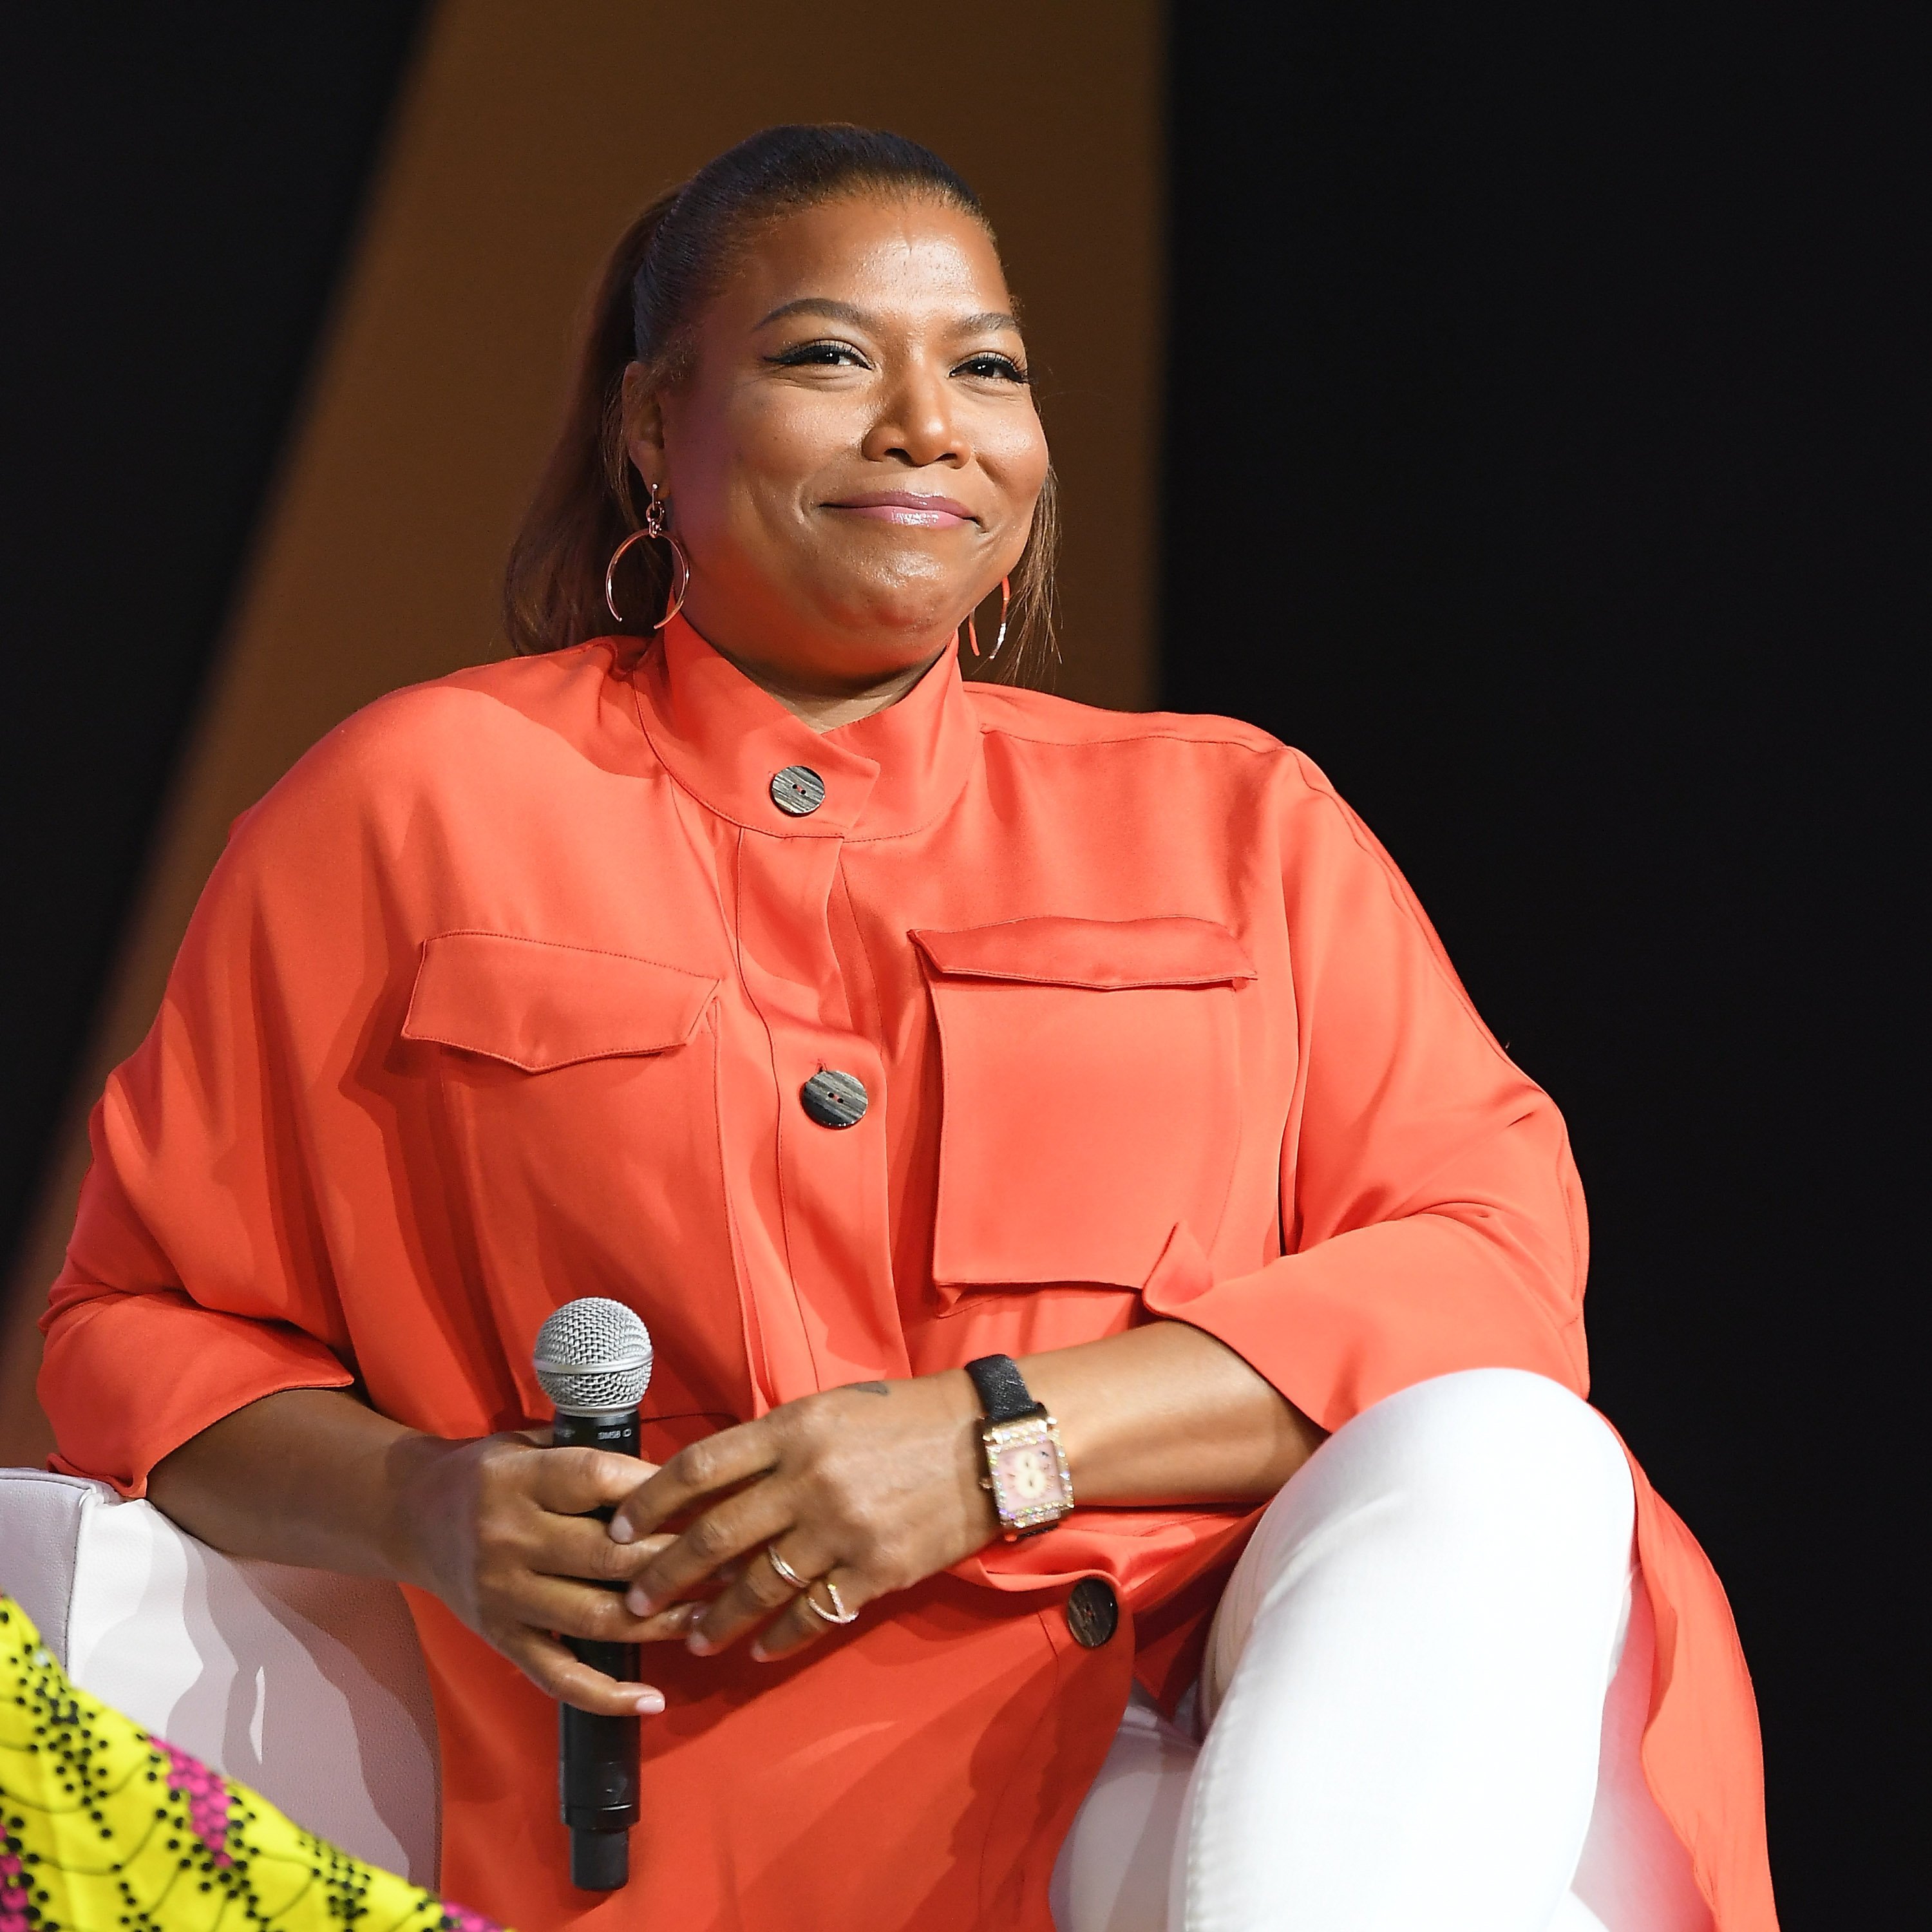 Queen Latifah during the 2018 Essence Festival in New Orleans, Louisiana on July 6, 2018 | Photo: Getty Images 